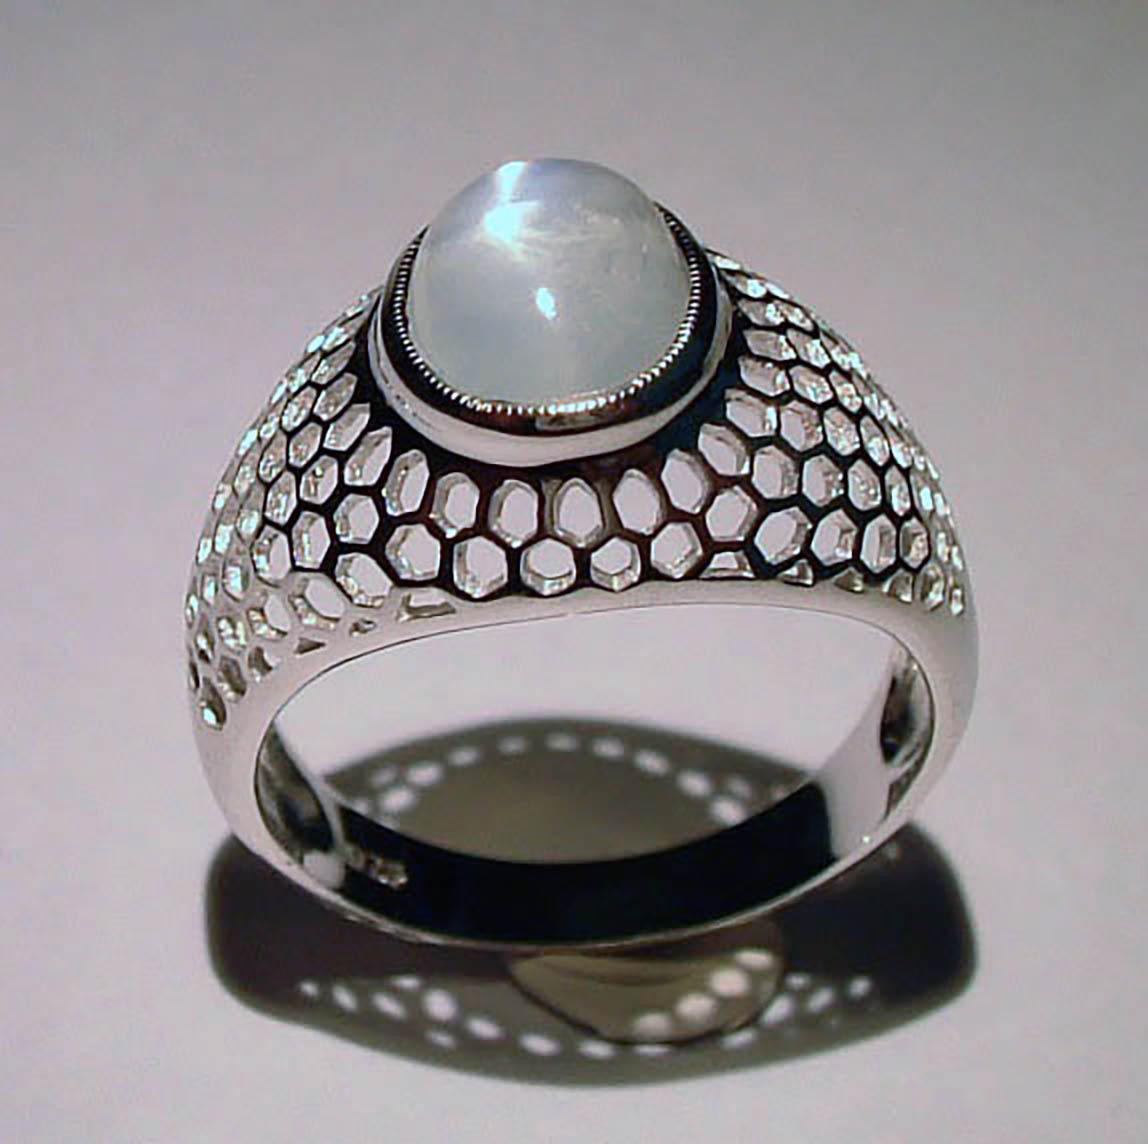 This Unique Silver Ring is set with a Large 5.6 Carat Burmese Moonstone. The Geometric Design is Timeless and is a Size 8.5 USA

Originally from San Diego, California, Kary Adam lived in the “Gem Capital of the World” - Bangkok, Thailand, sourcing